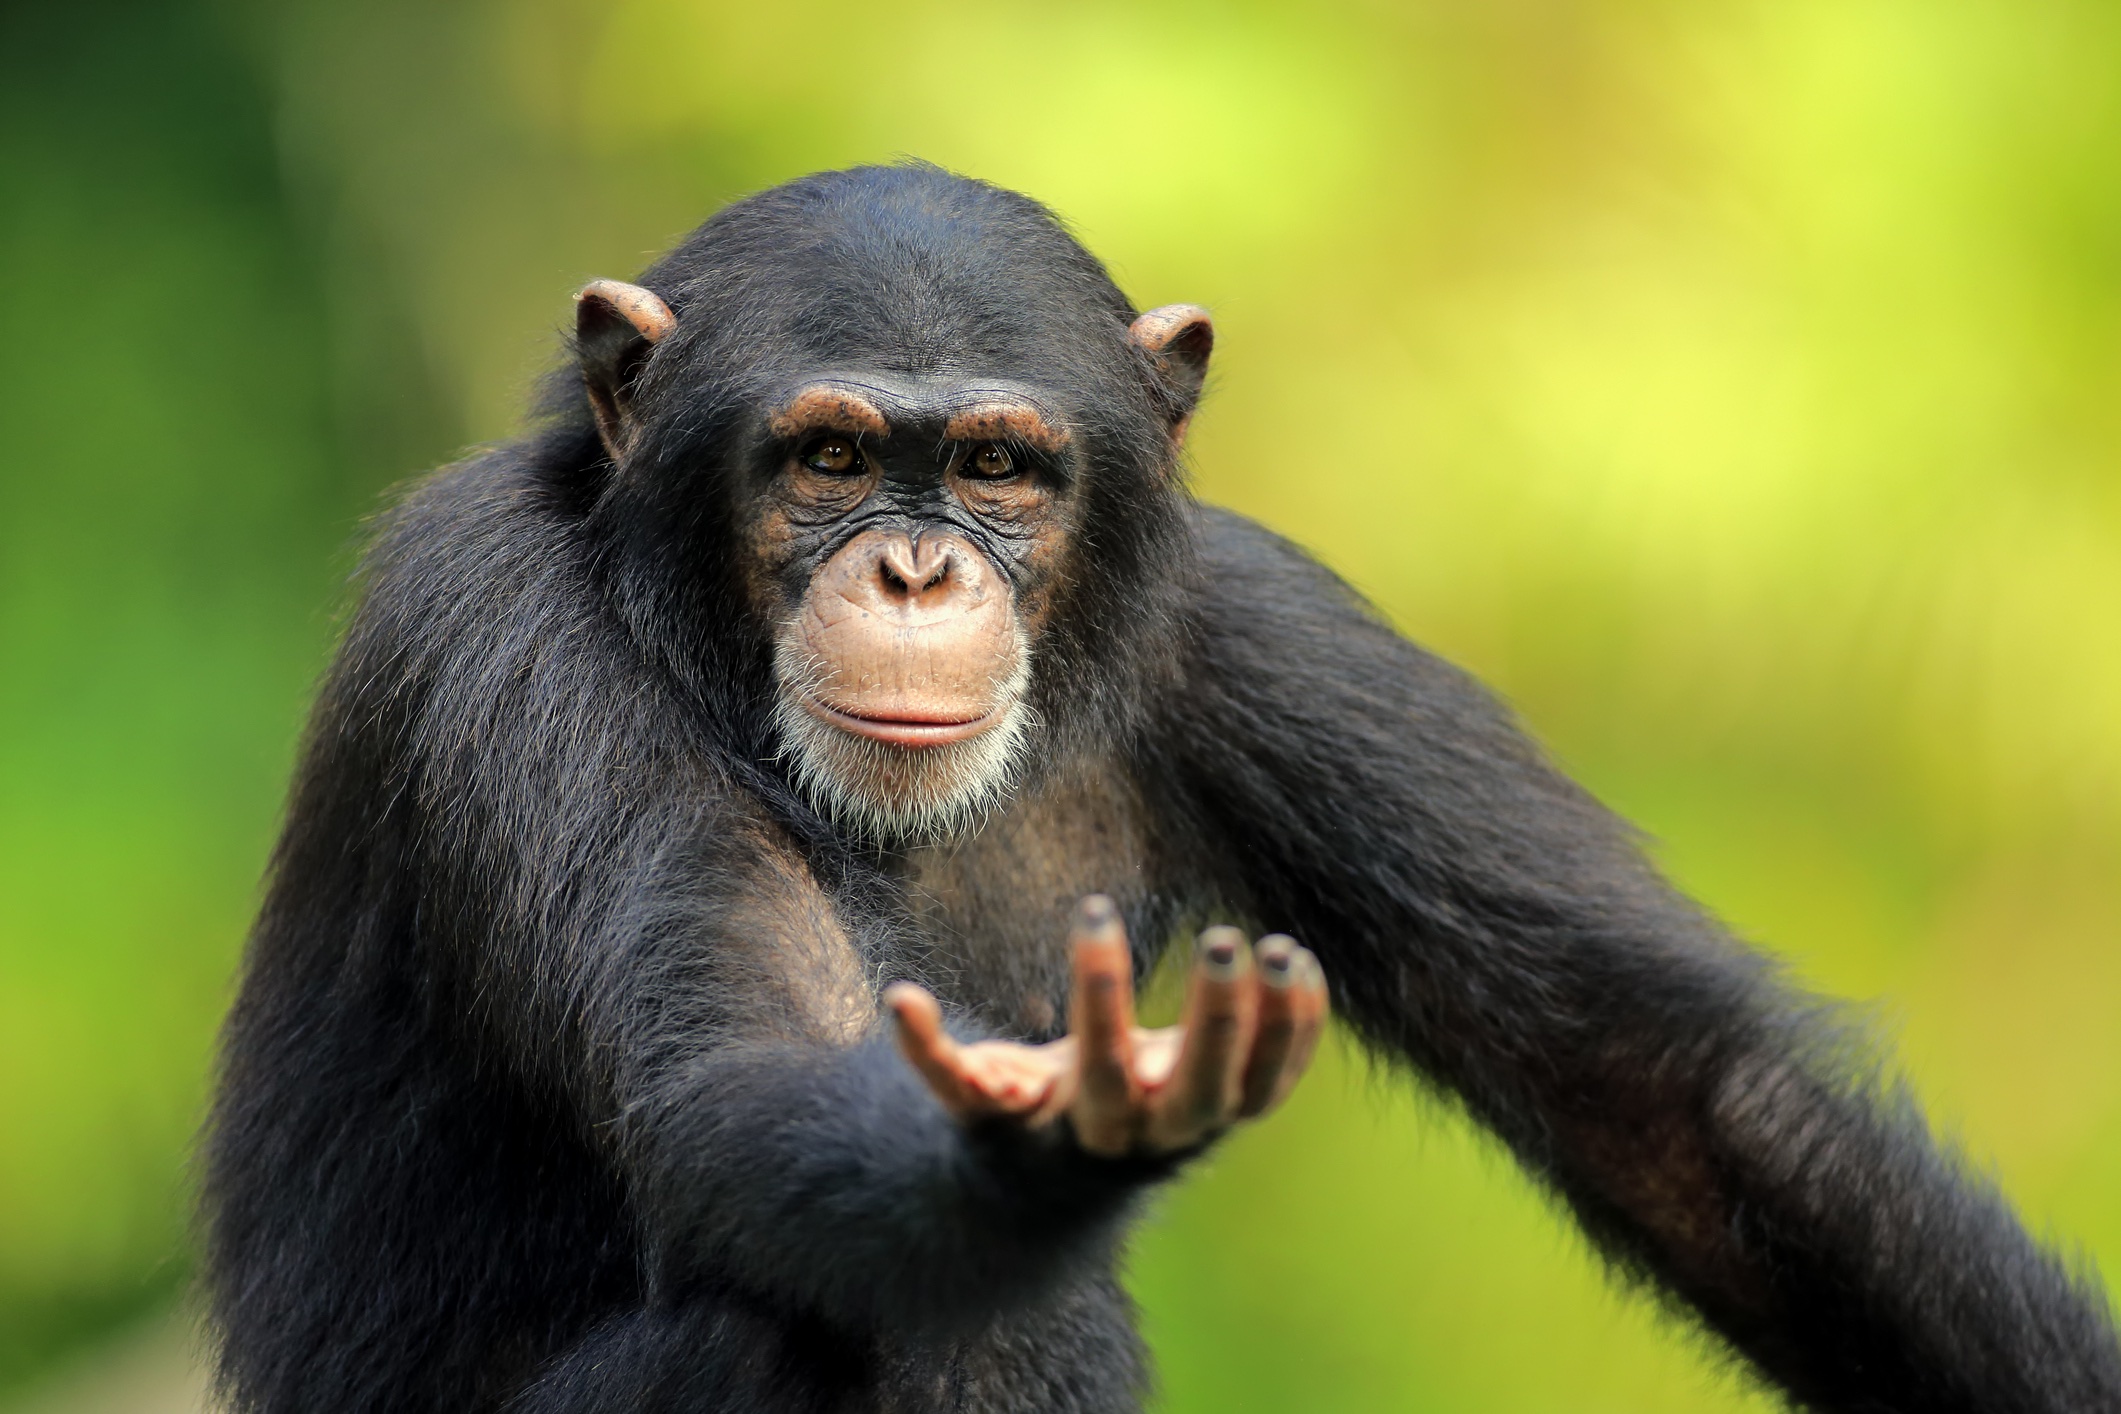 A chimpanzee beckoning with an outstretched hand.